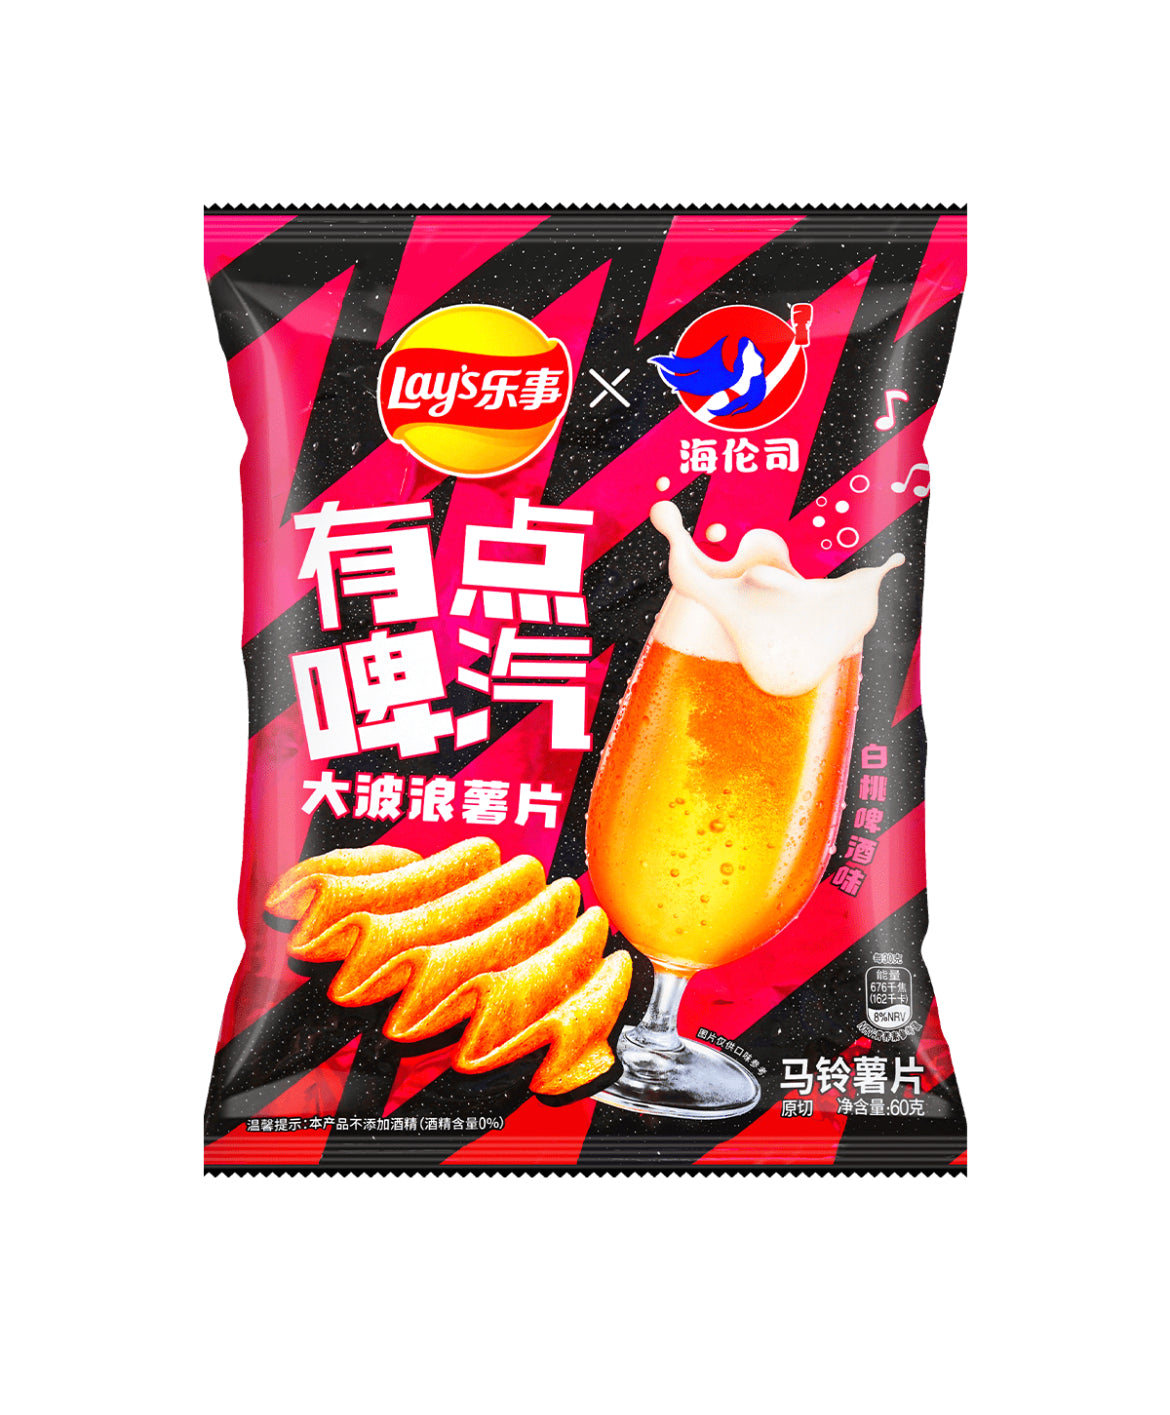 Lay’s White Peach Beer Flavored Chips [Non-Alcoholic] (China)